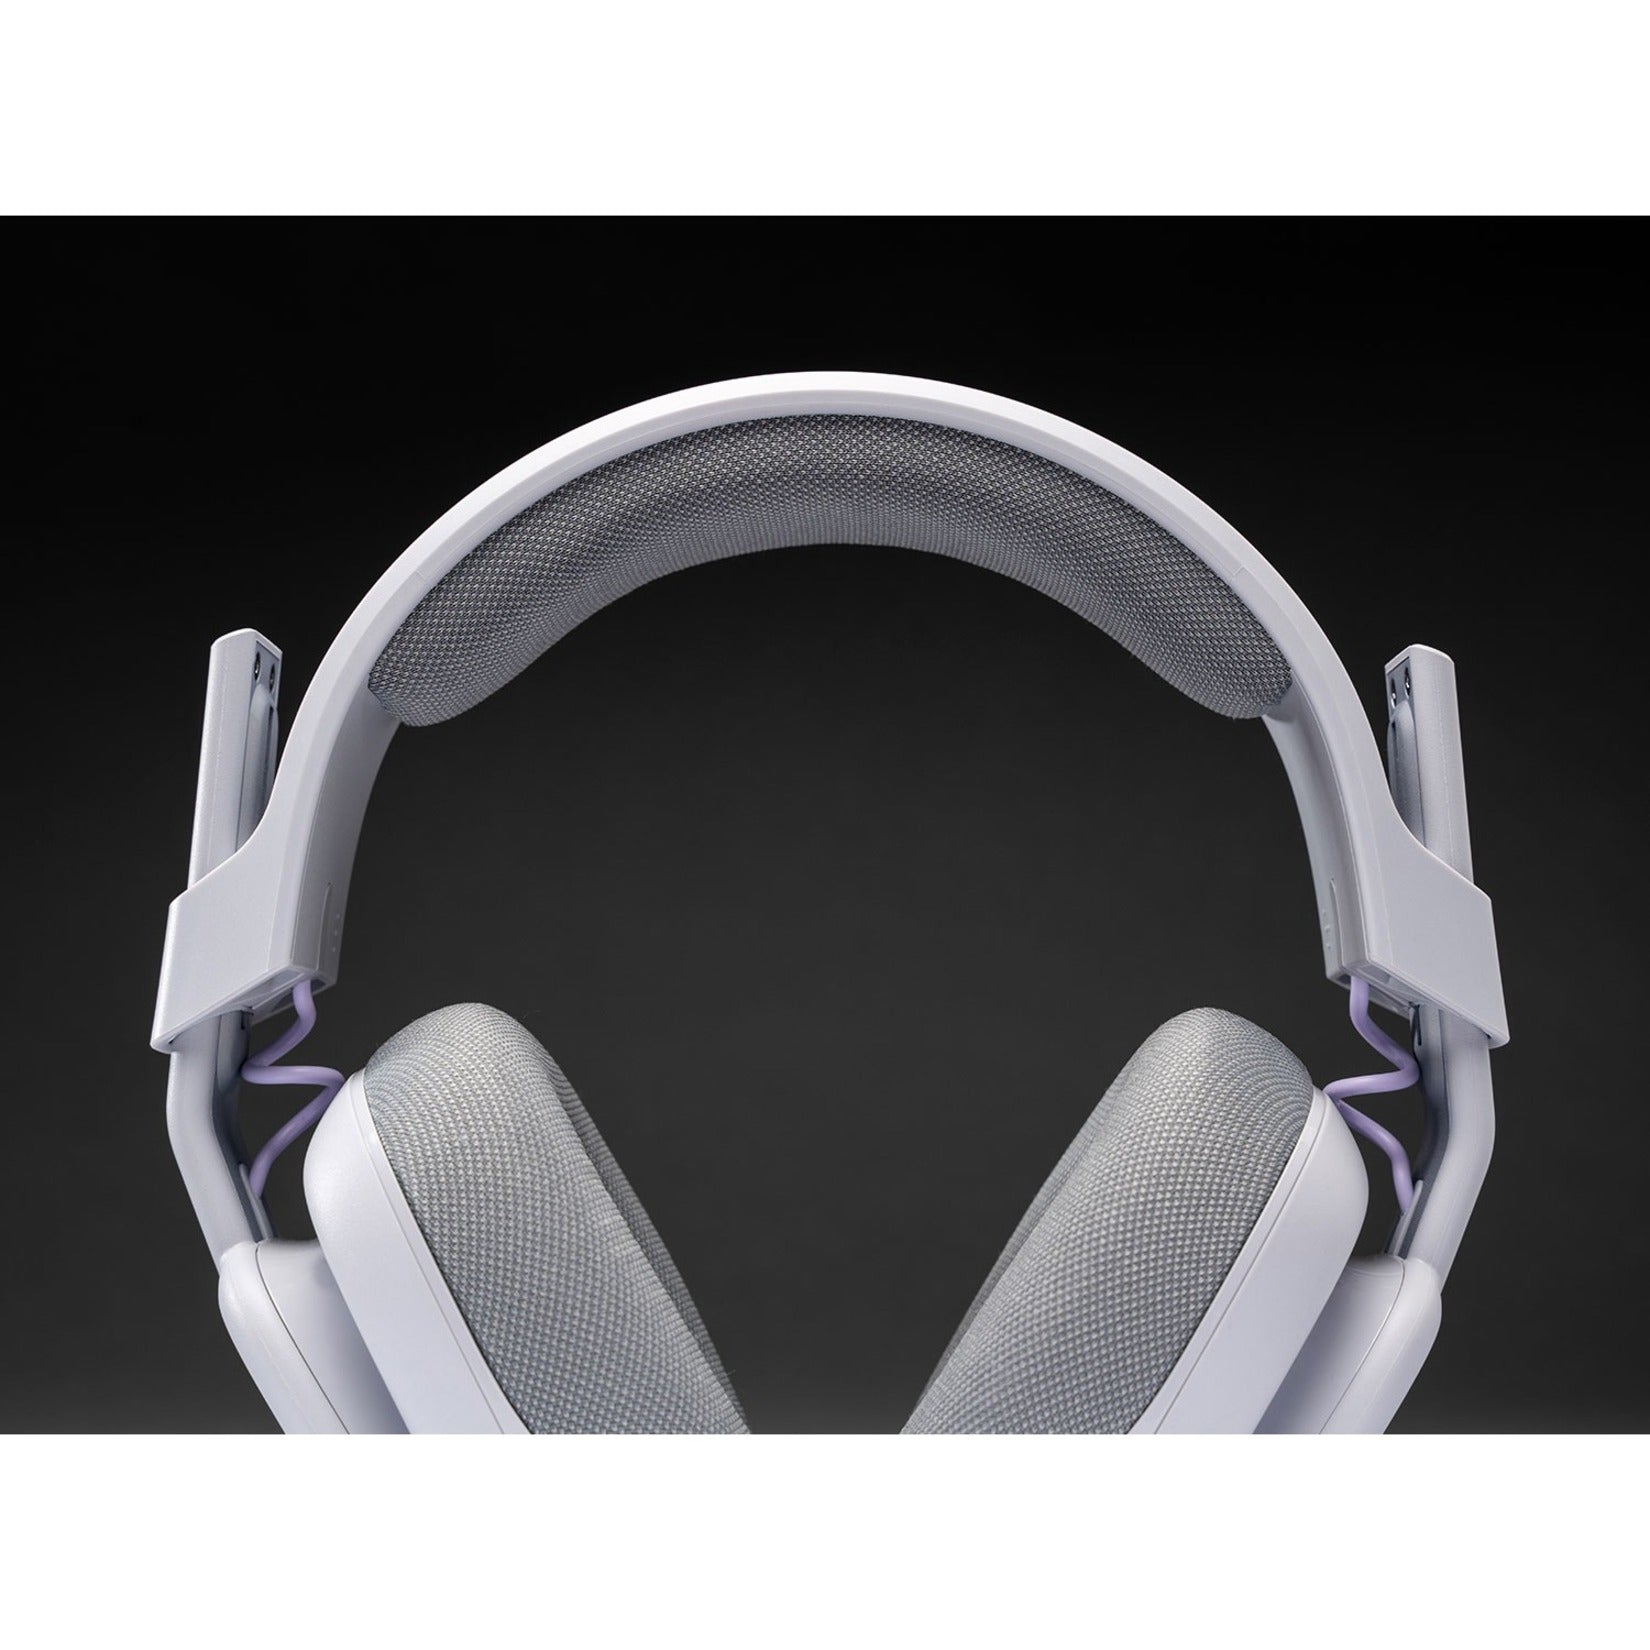 Astro 939-002069 A10 Headset, Gaming Headset with Flip to Mute, Detachable Cable, Comfortable, Lightweight, Gray